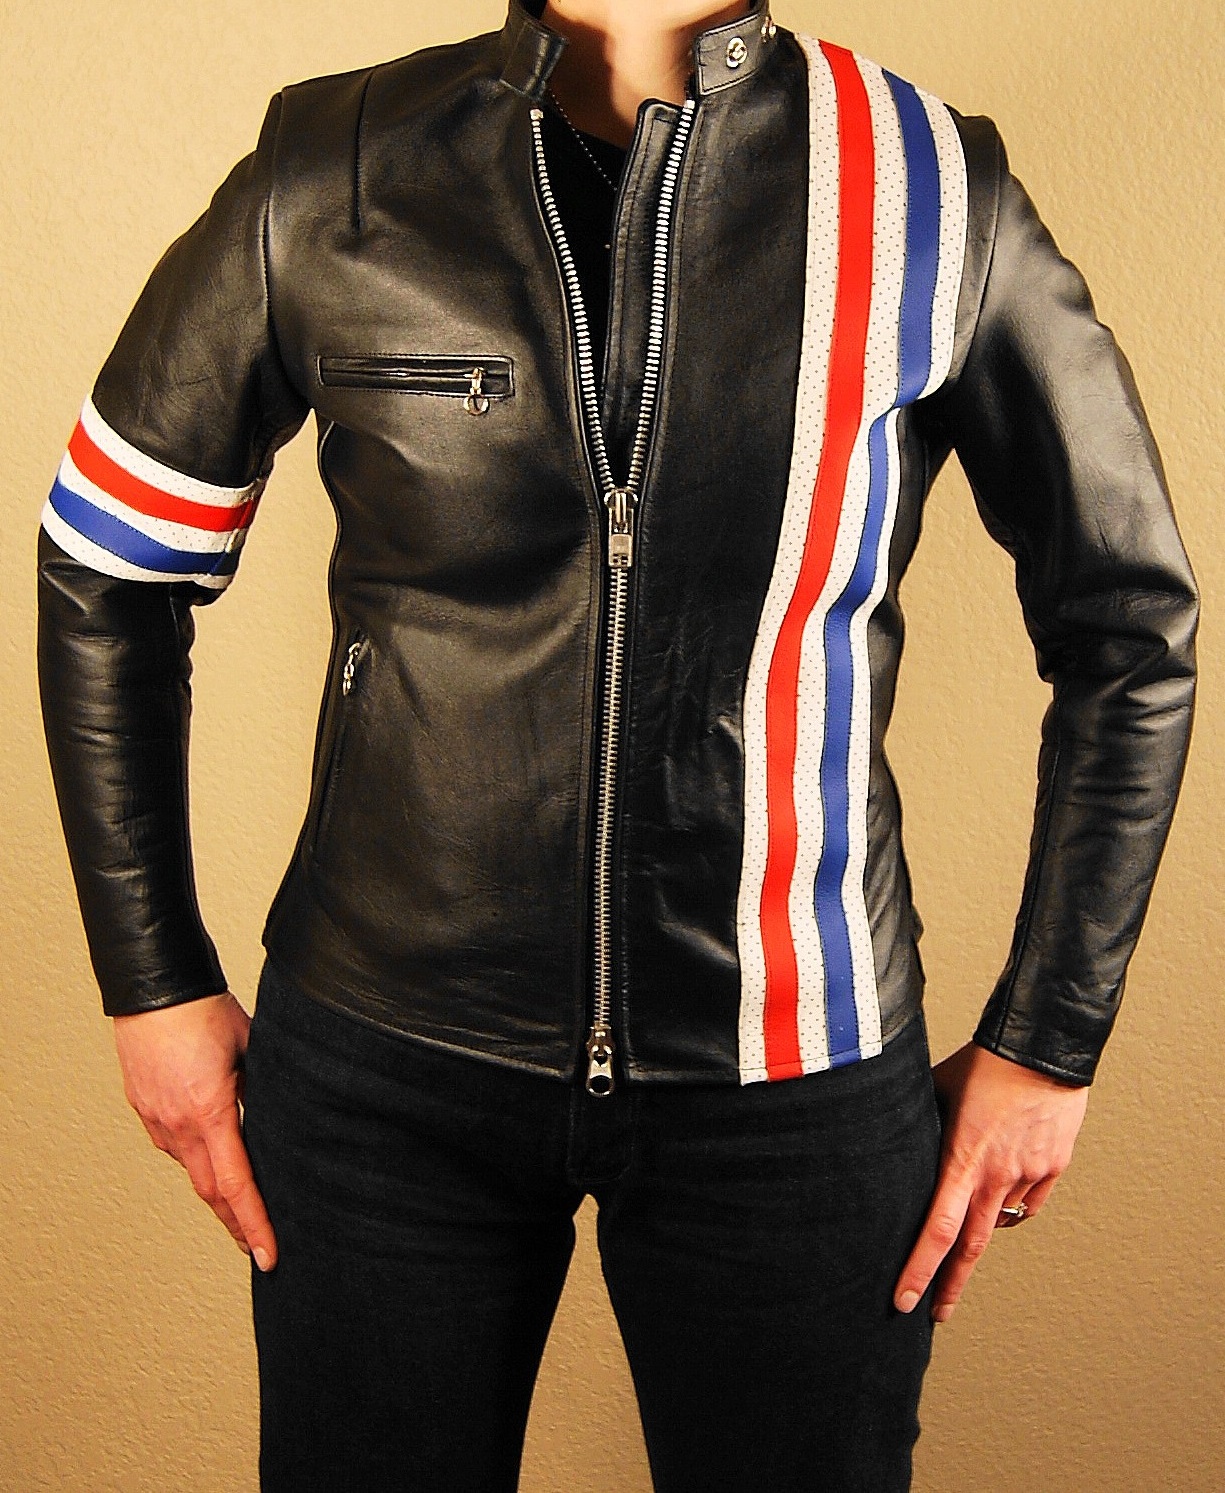 Pacific Cycle Leathers Womens Fonda front.JPG